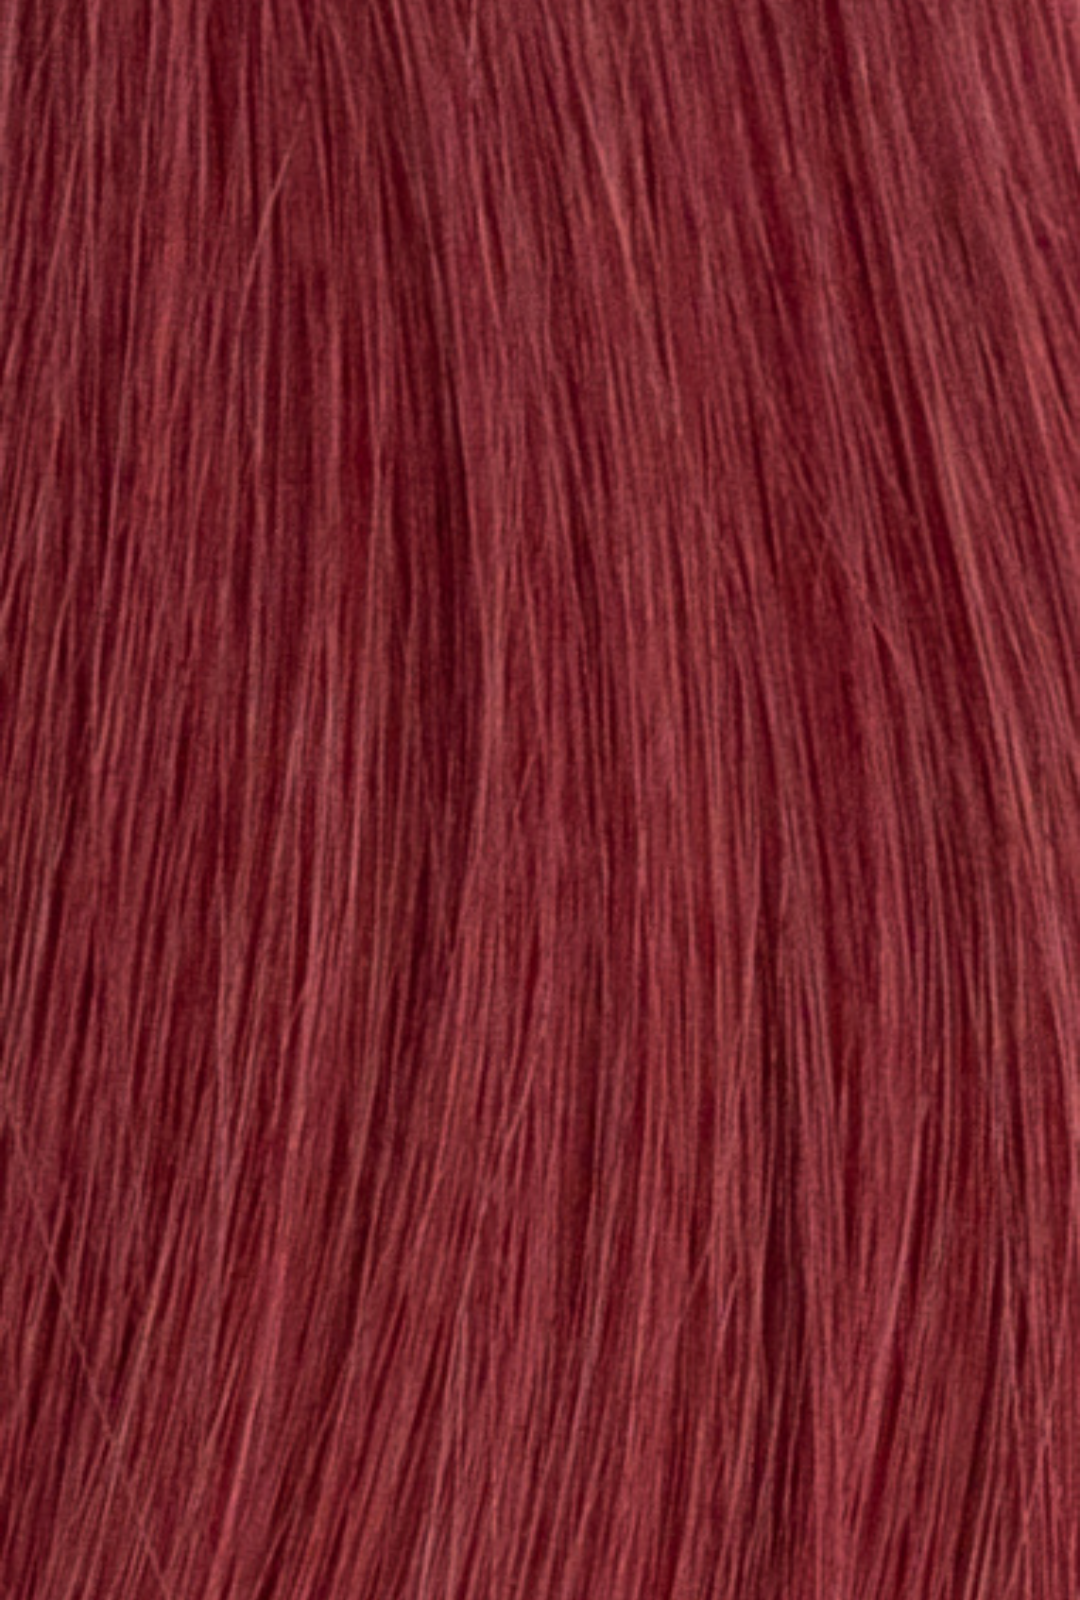 Laced Hair Keratin Bond Extensions Ruby Red